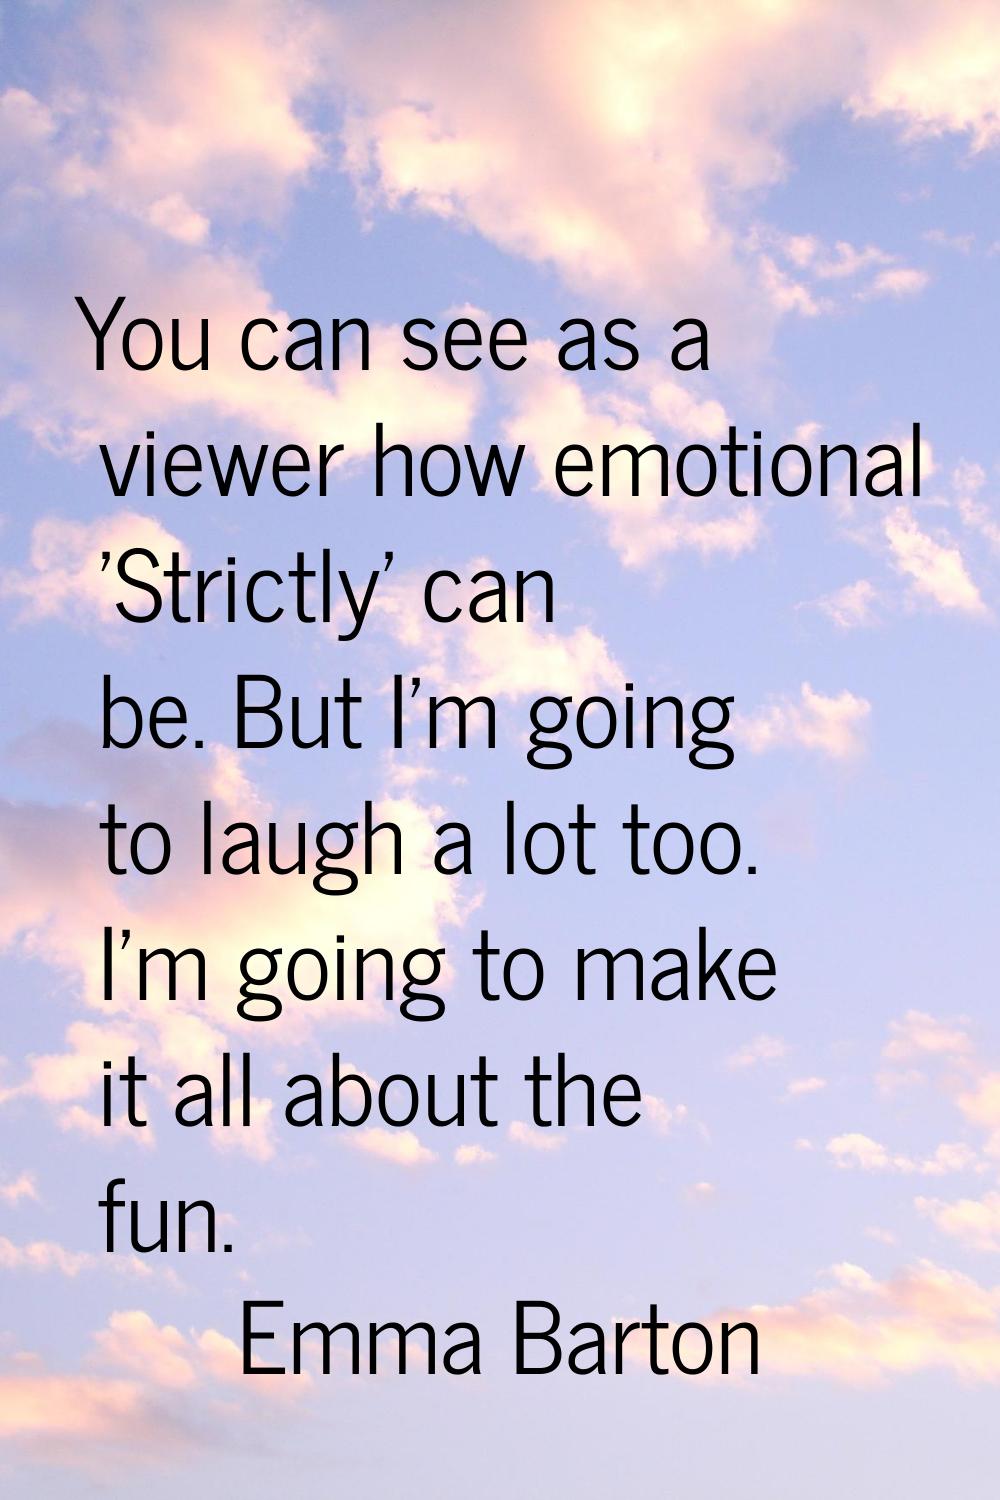 You can see as a viewer how emotional 'Strictly' can be. But I'm going to laugh a lot too. I'm goin